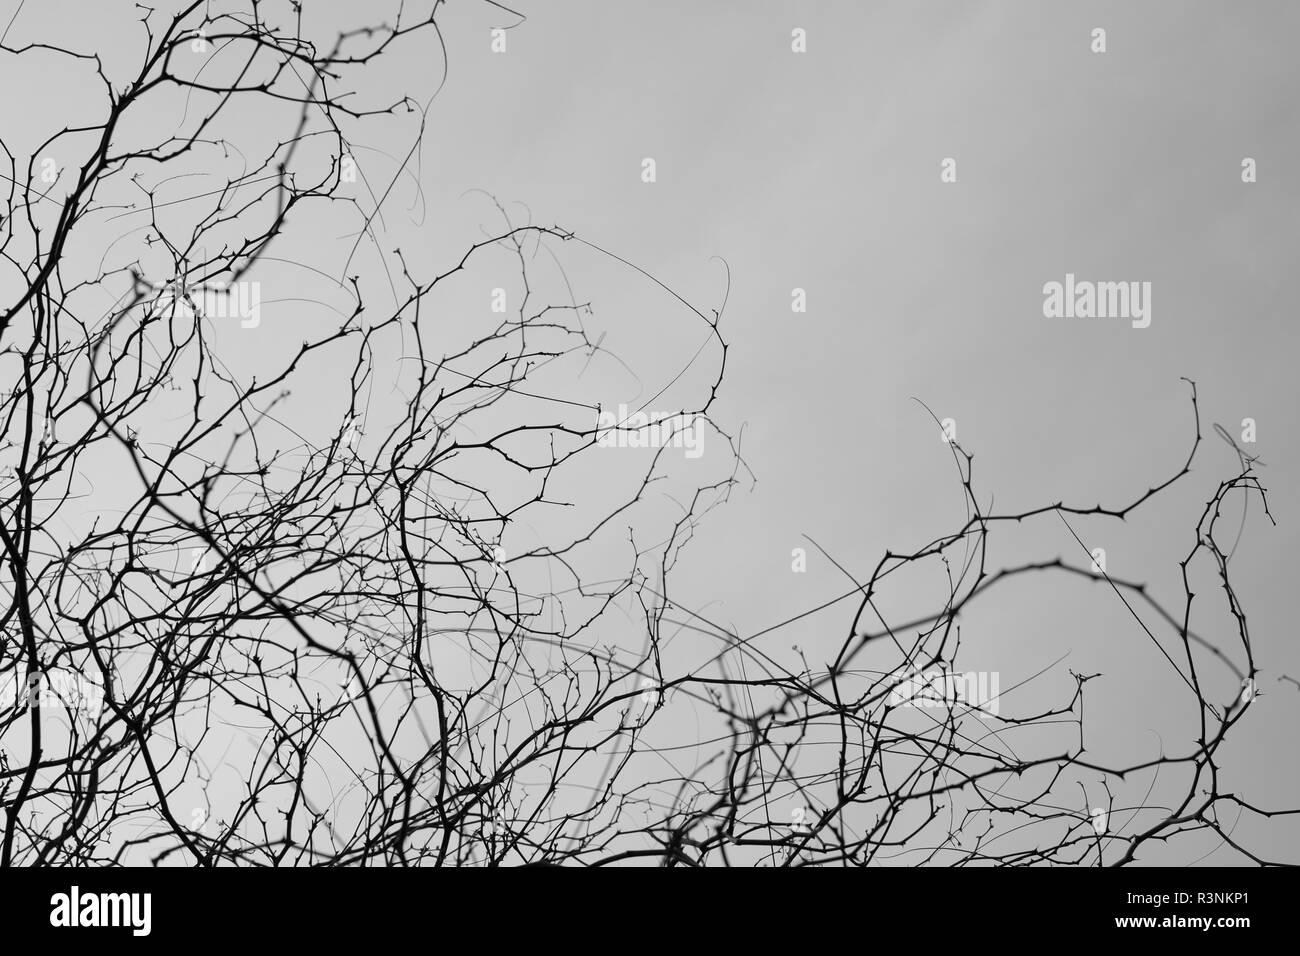 Tree branches with thorns and cloudy gray sky. Stock Photo